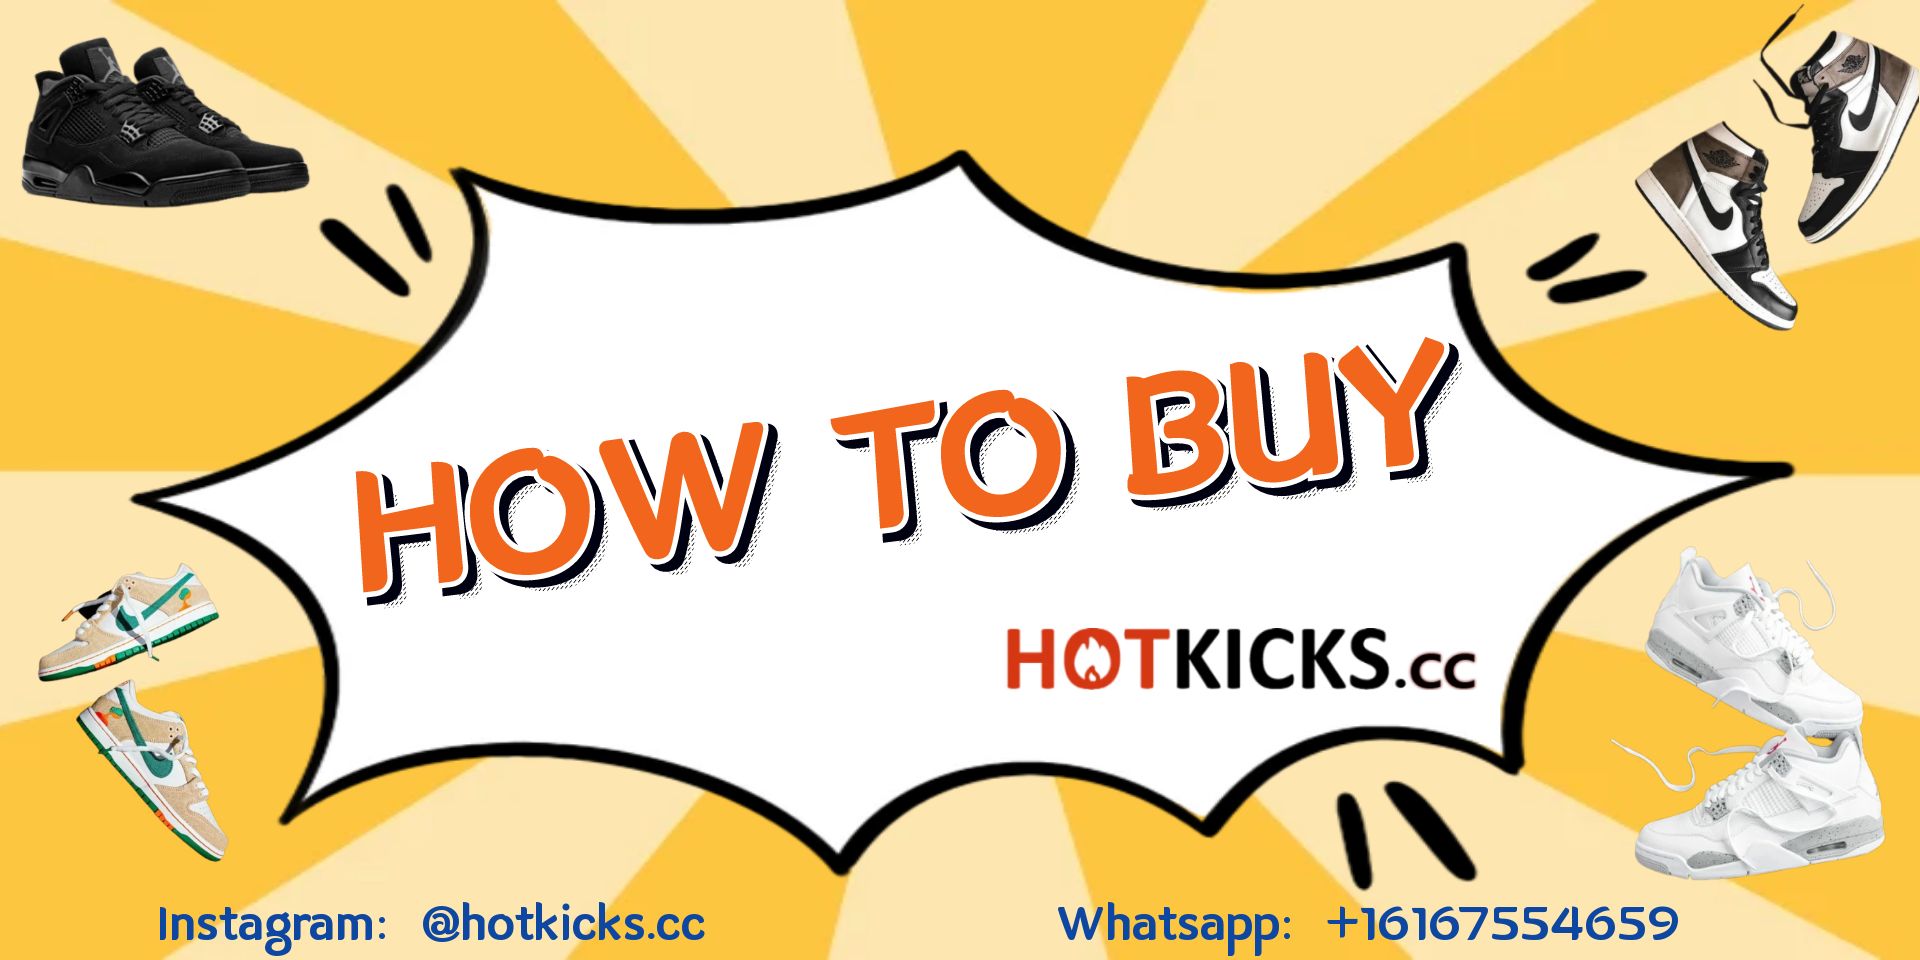 HOW TO ORDER FROM HOTKICKS